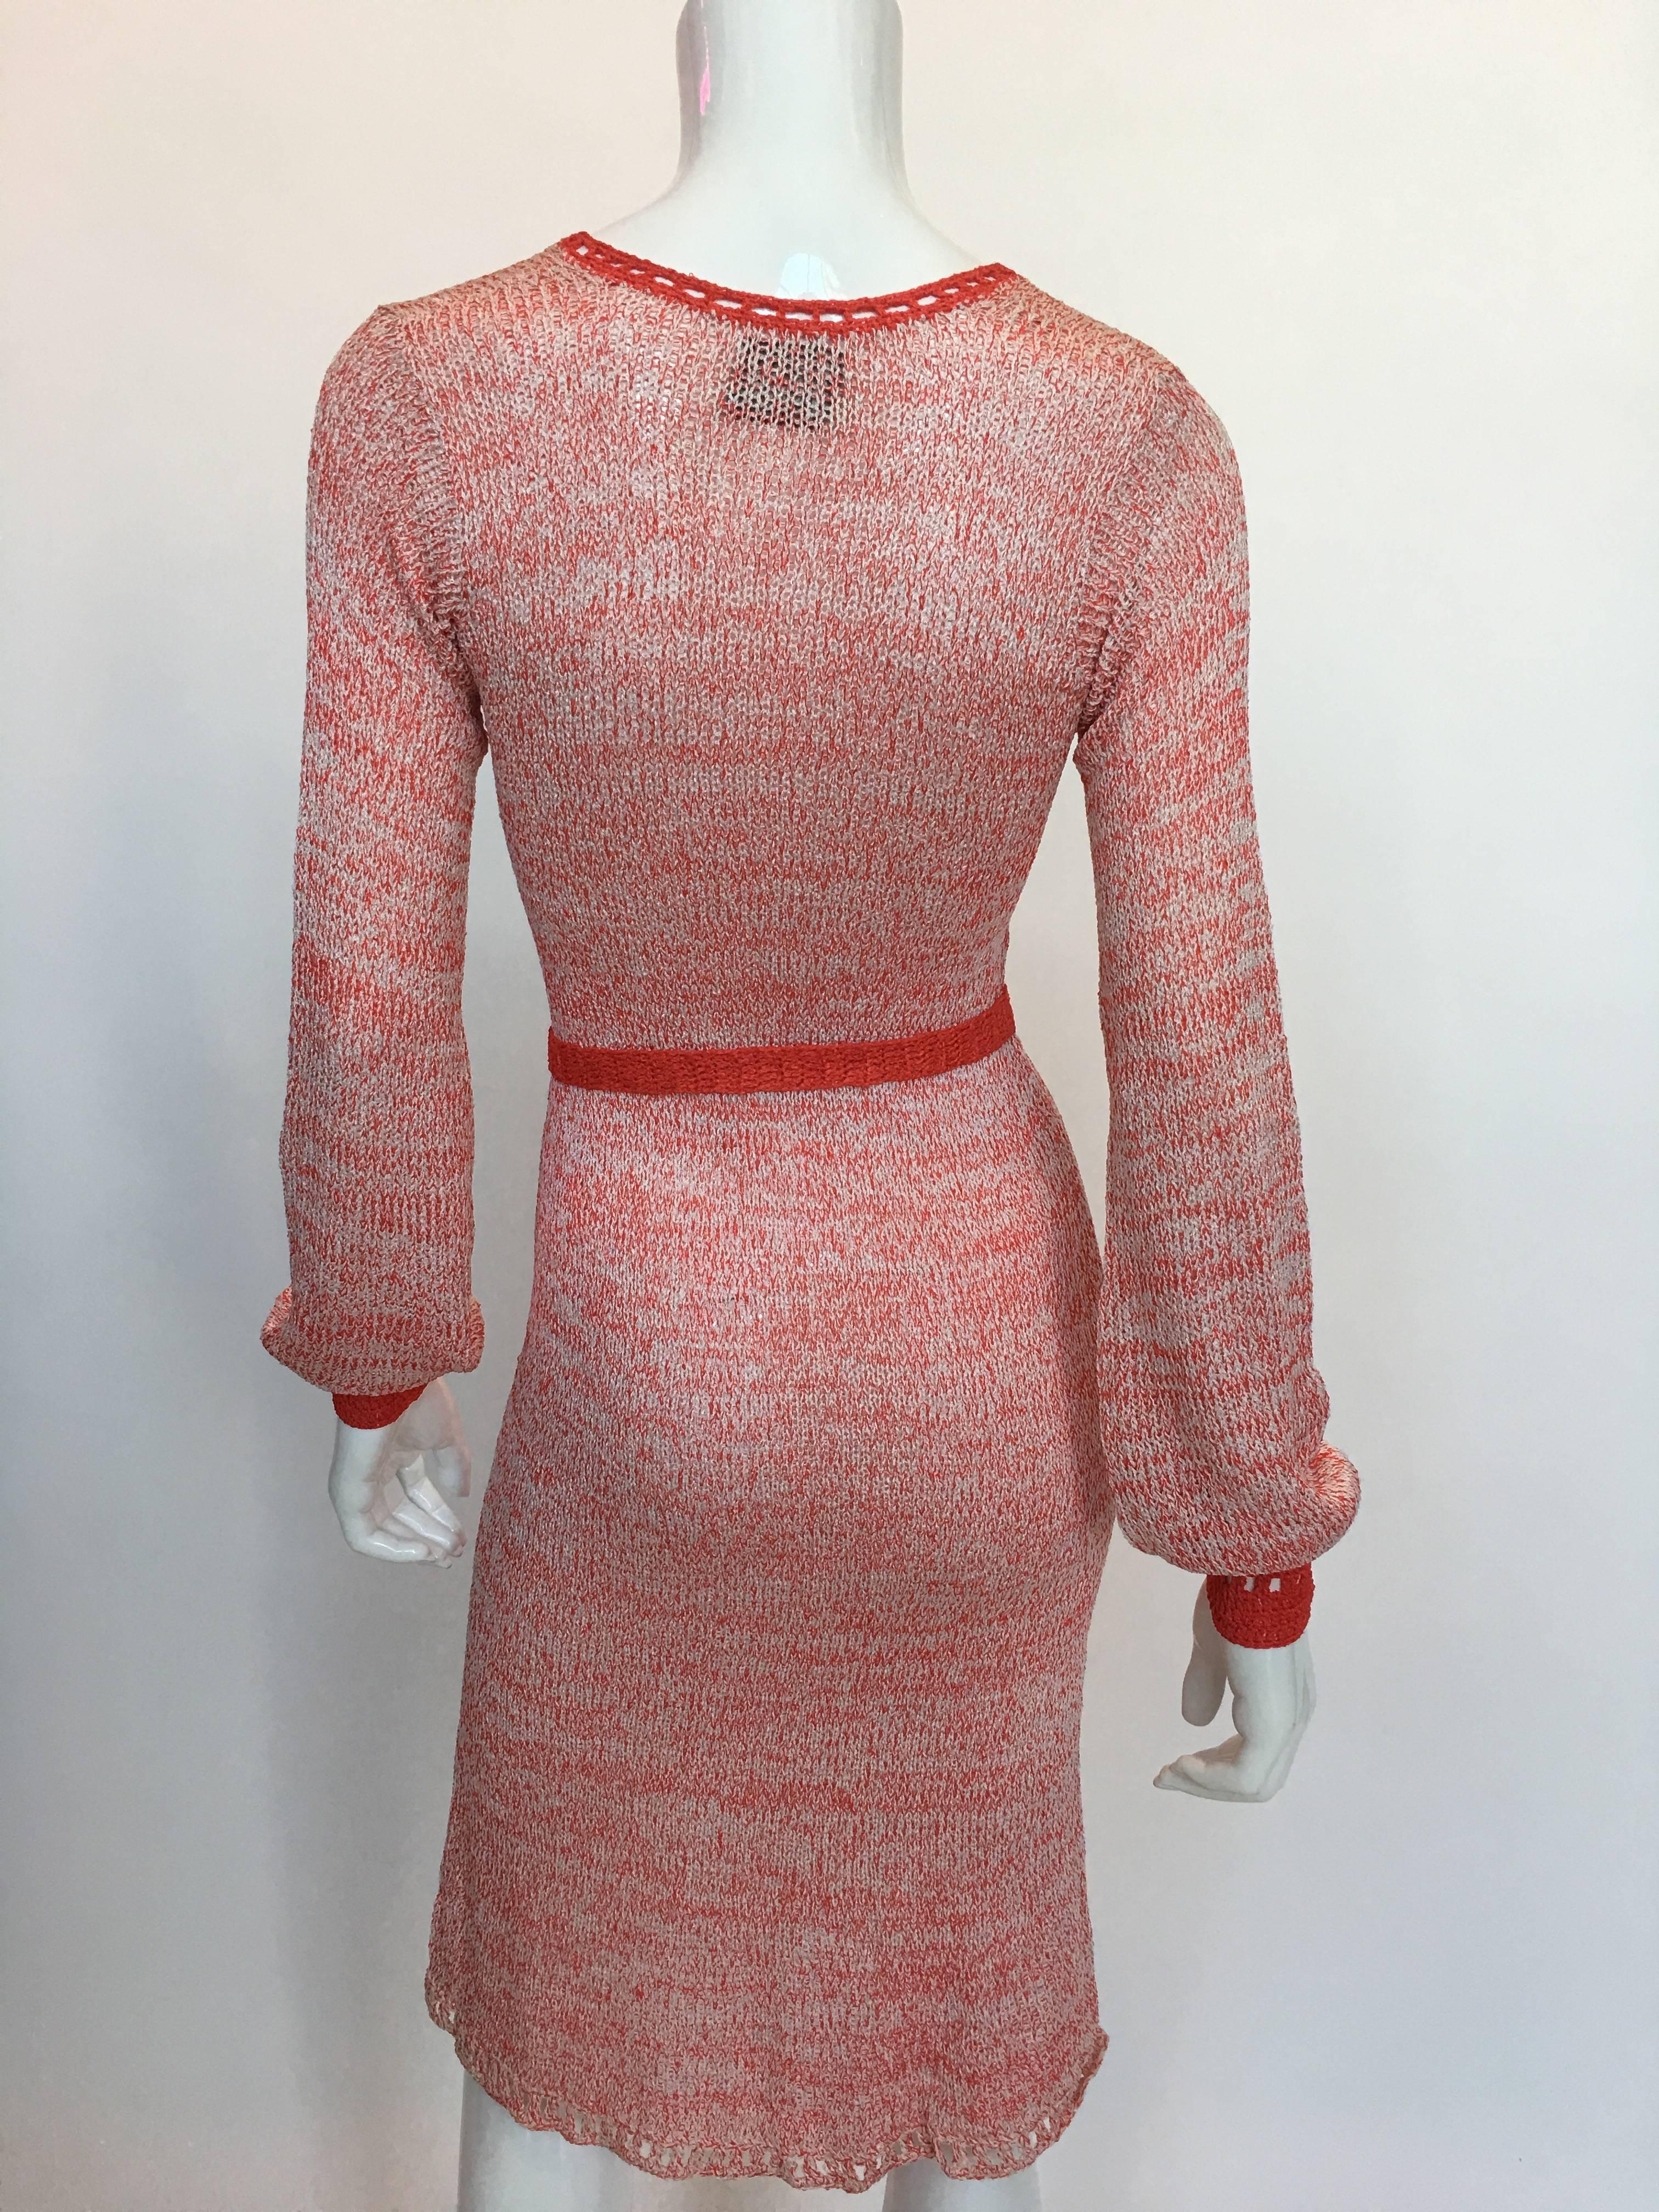 1970s Helga Howie Knit Red/White Space Dye Dress For Sale 2